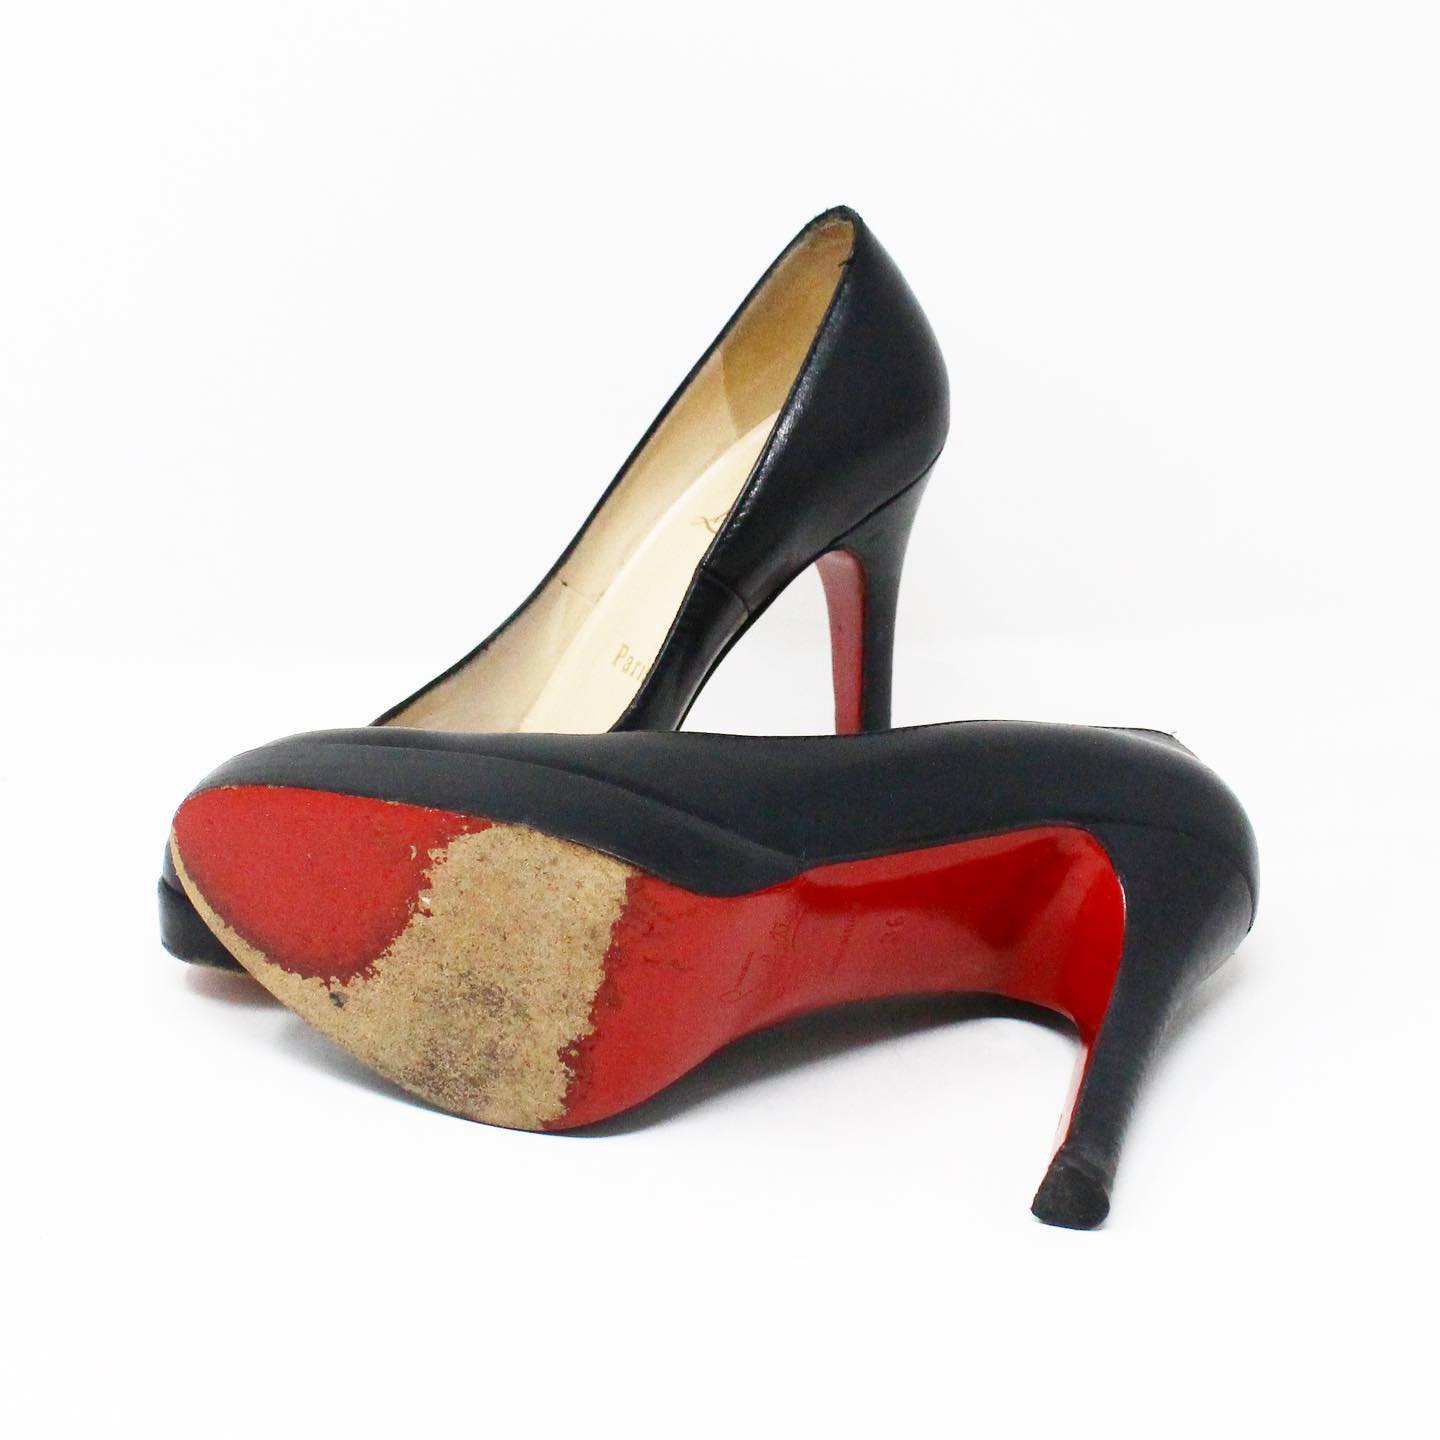 Christian Louboutin - Authenticated Heel - Suede Black Plain for Women, Good Condition